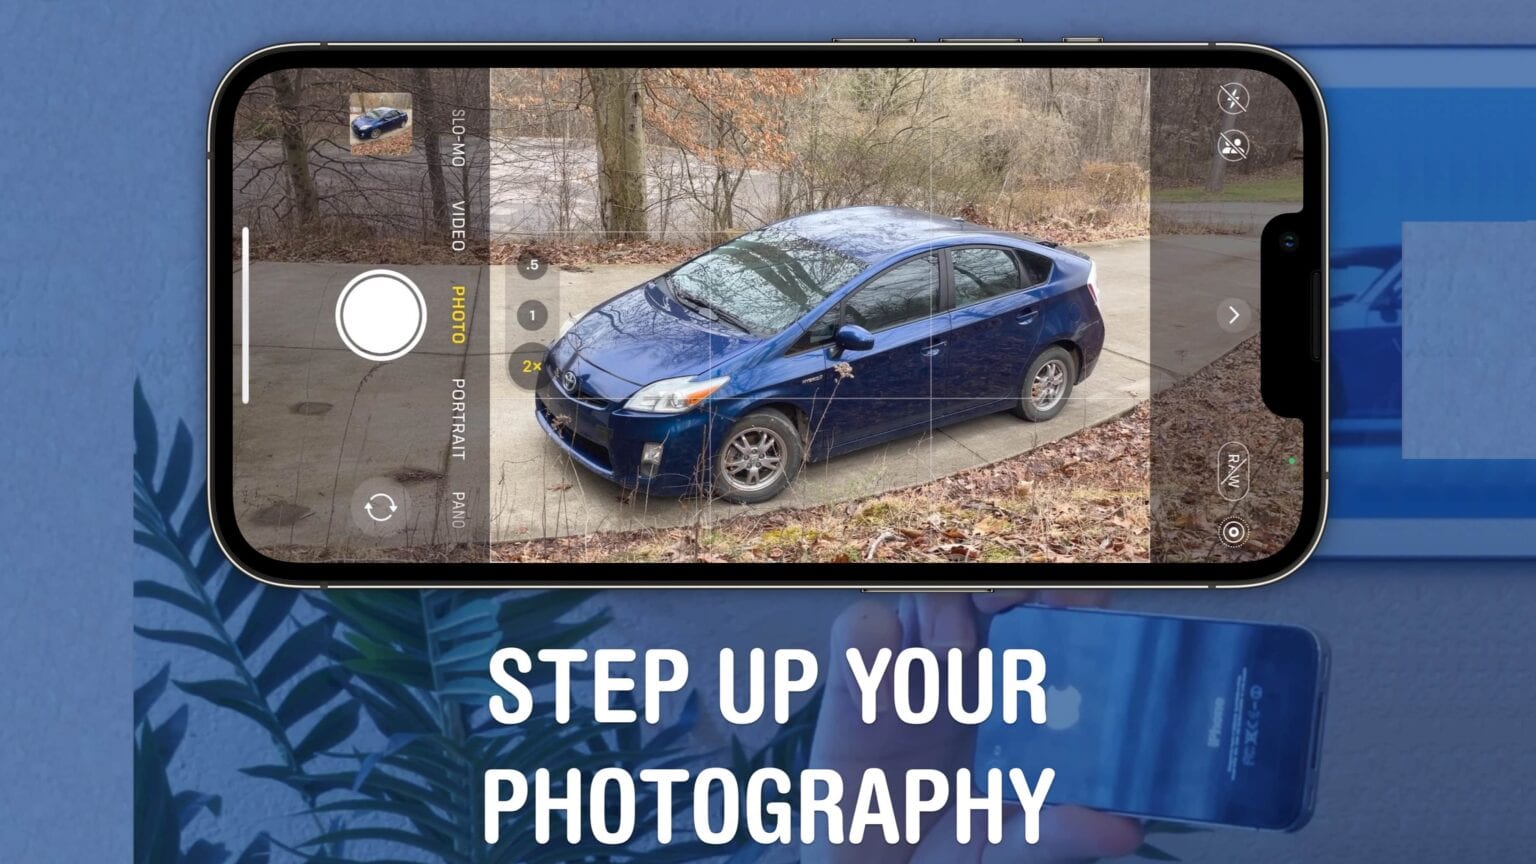 Step up your photography